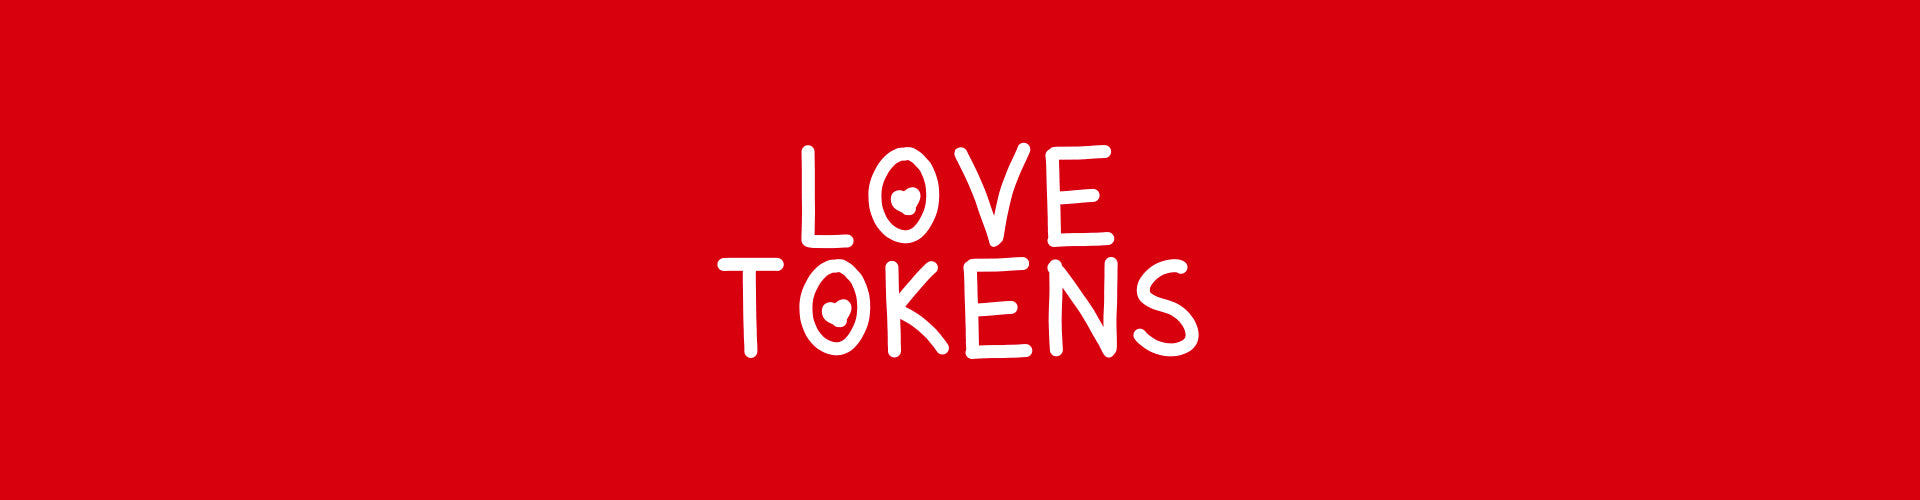 Fall For Love Tokens